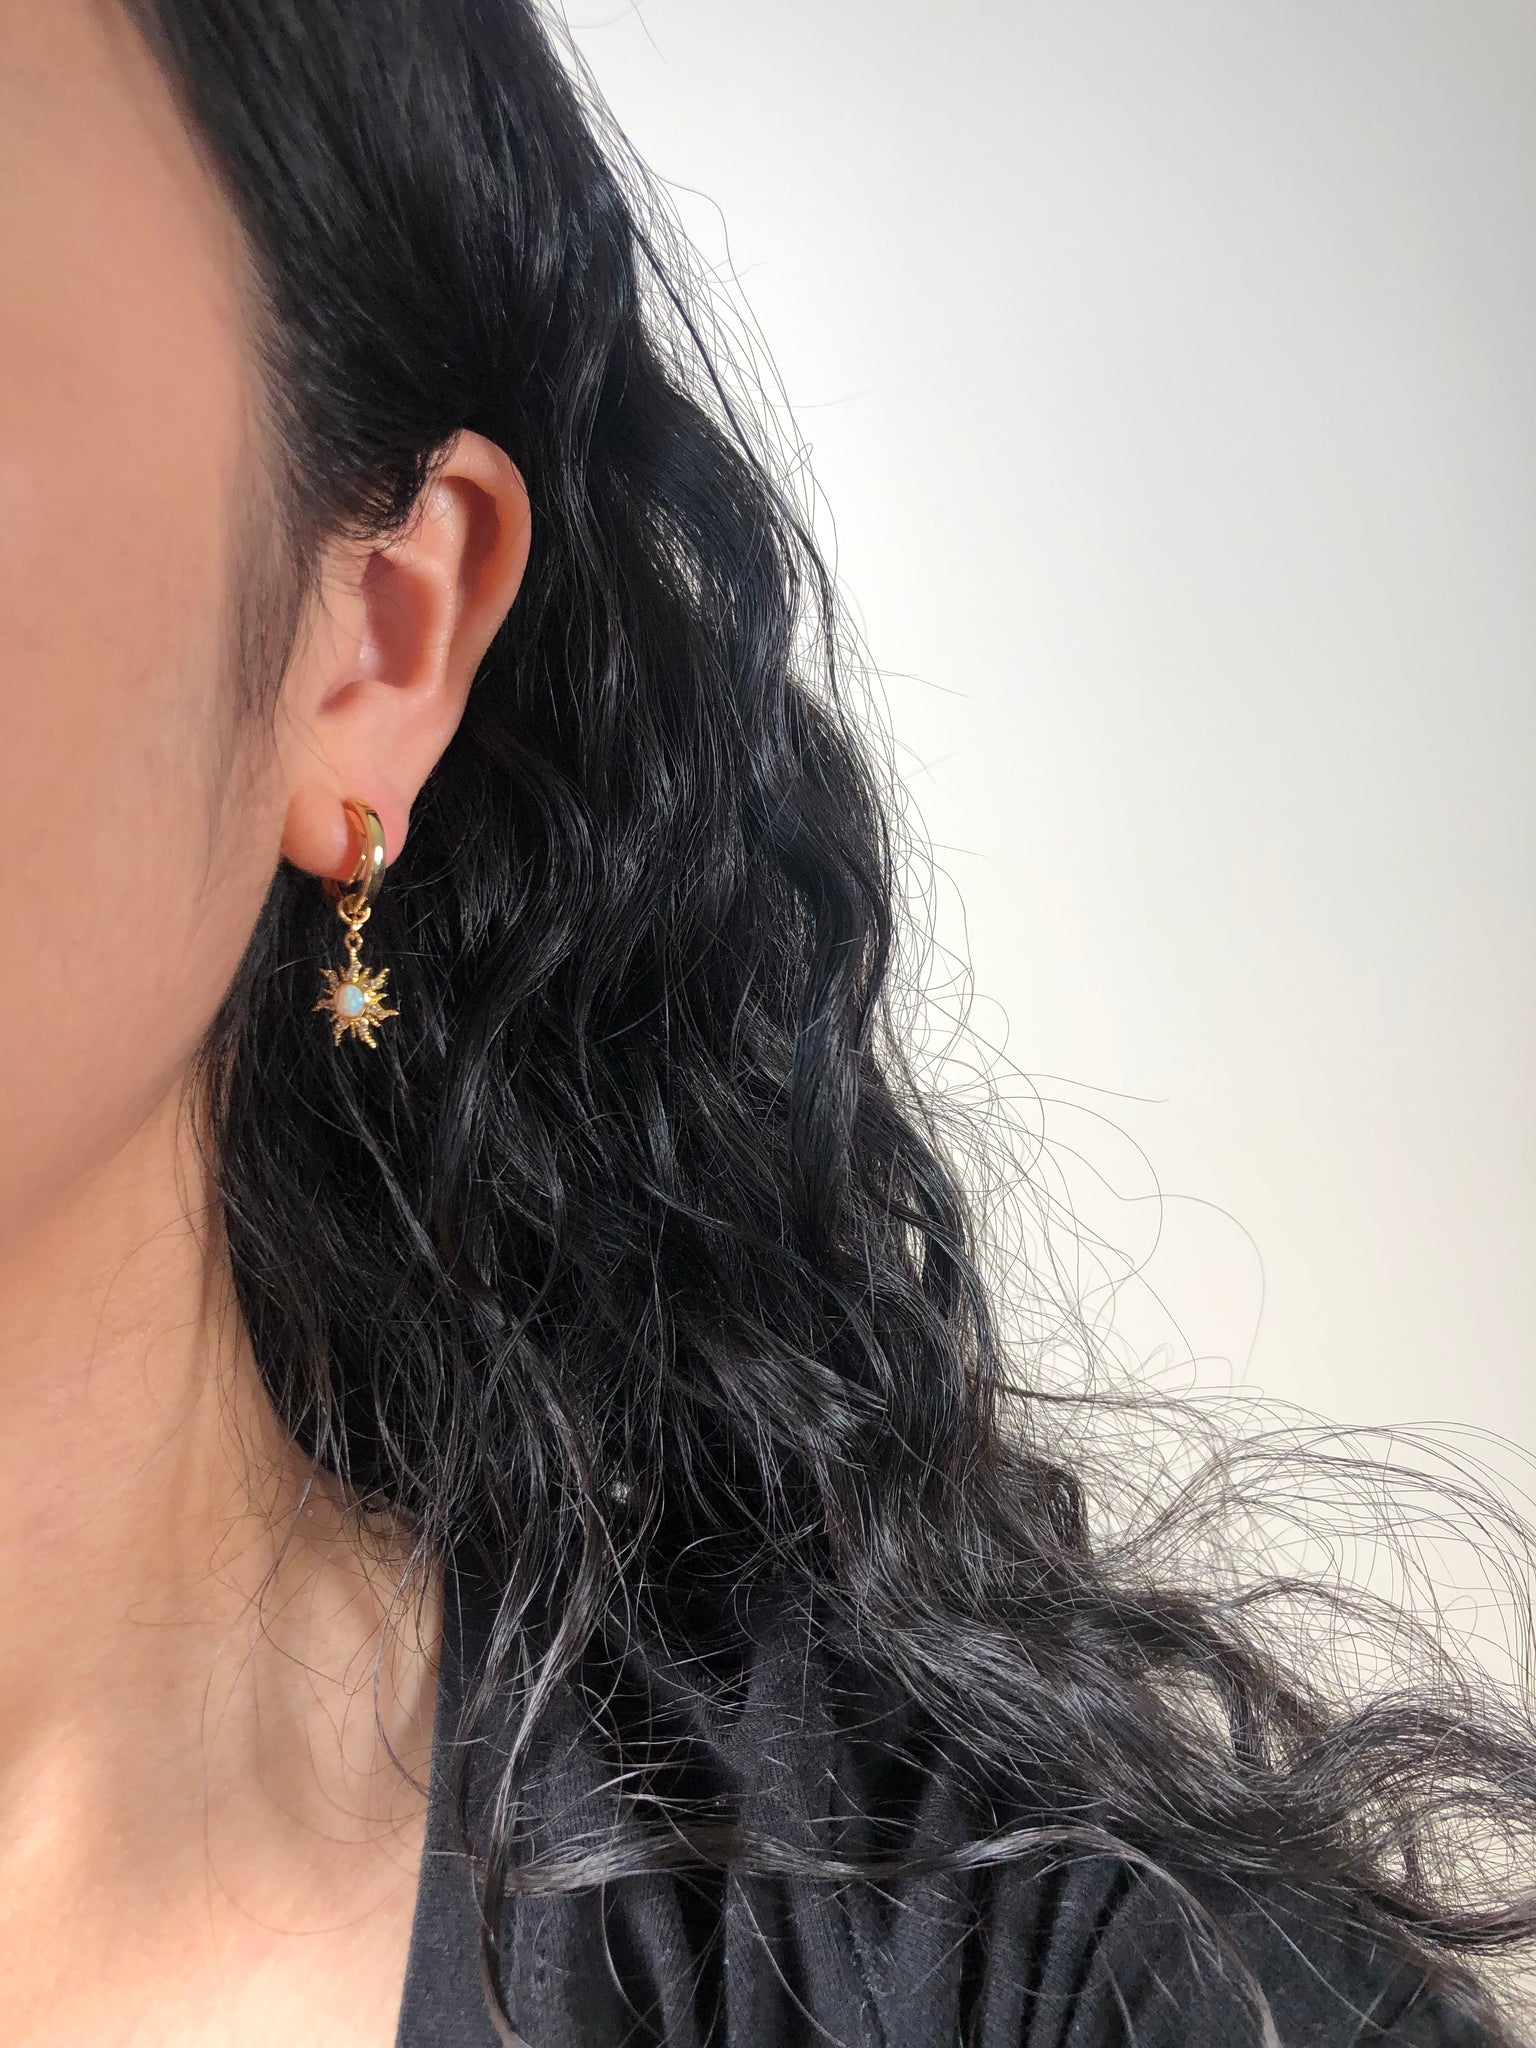 gold clipon hoop earrings with constellation sun charm